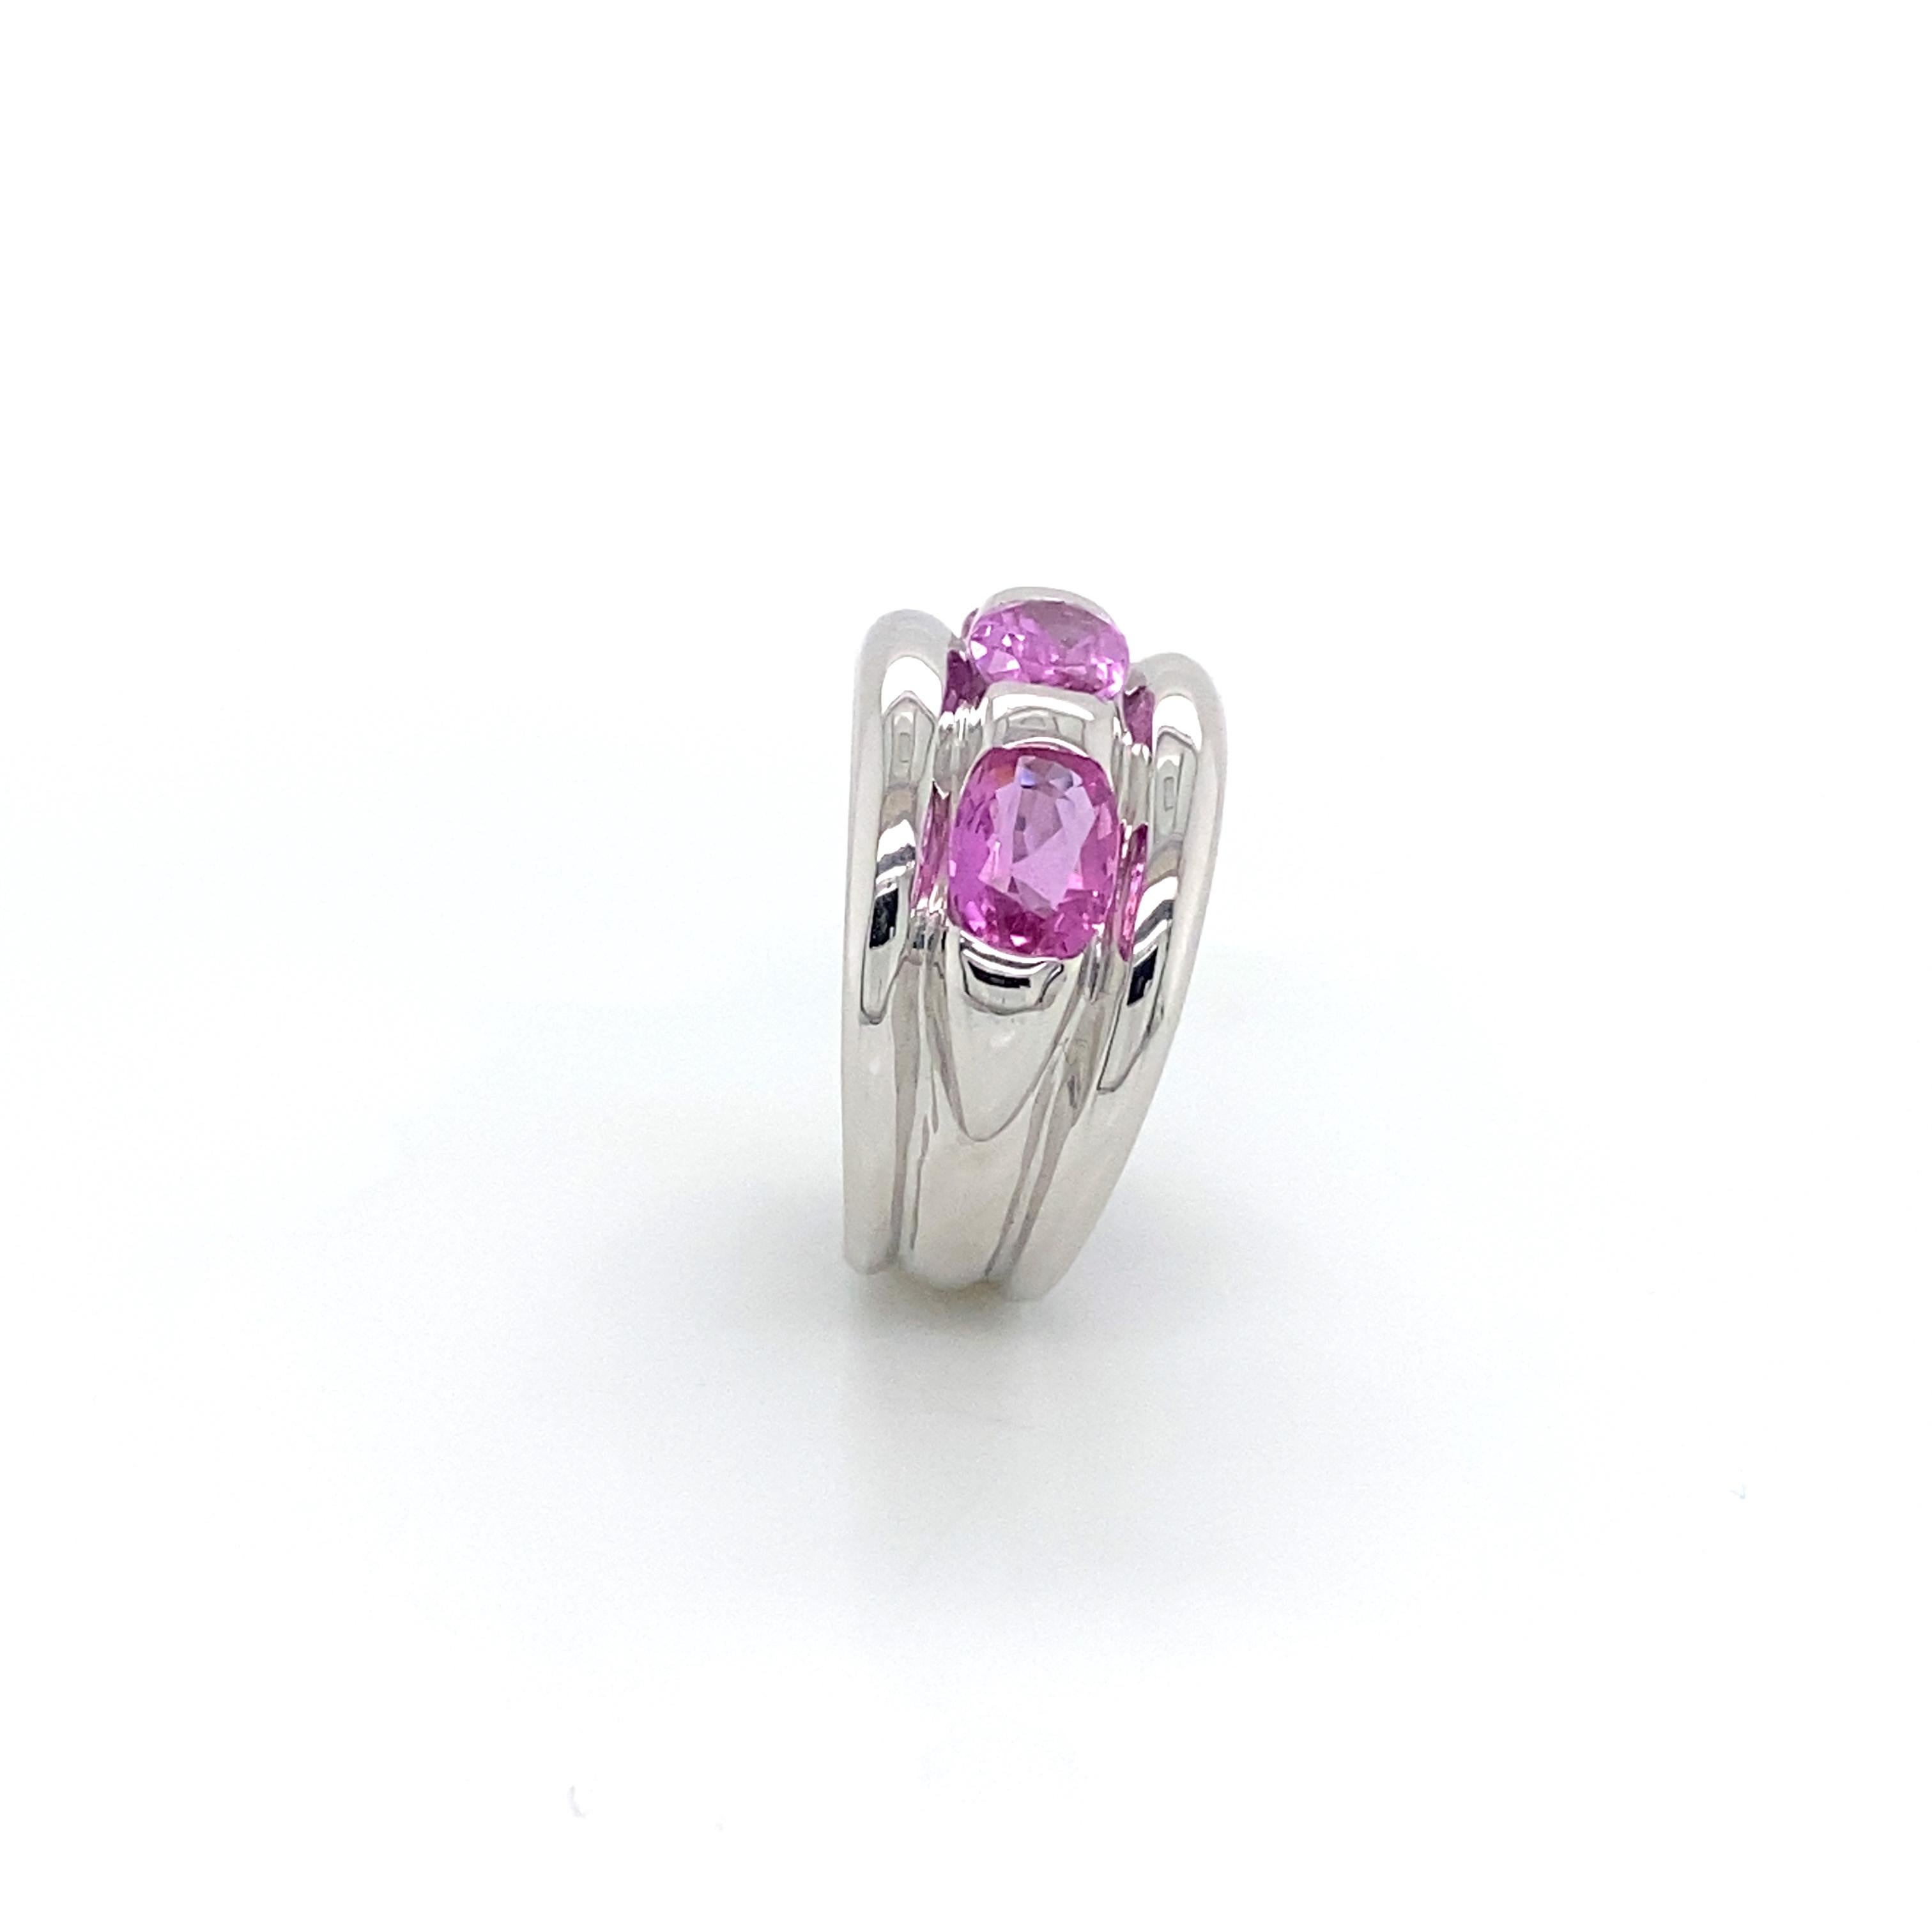 18K White Gold Ring with 3 Pink Sapphires

Fashion Ring Artisan style with 3 sapphires of 2.620 carats. 18 karat white gold setting.
Size: 54 FR, N UK, 7 US 